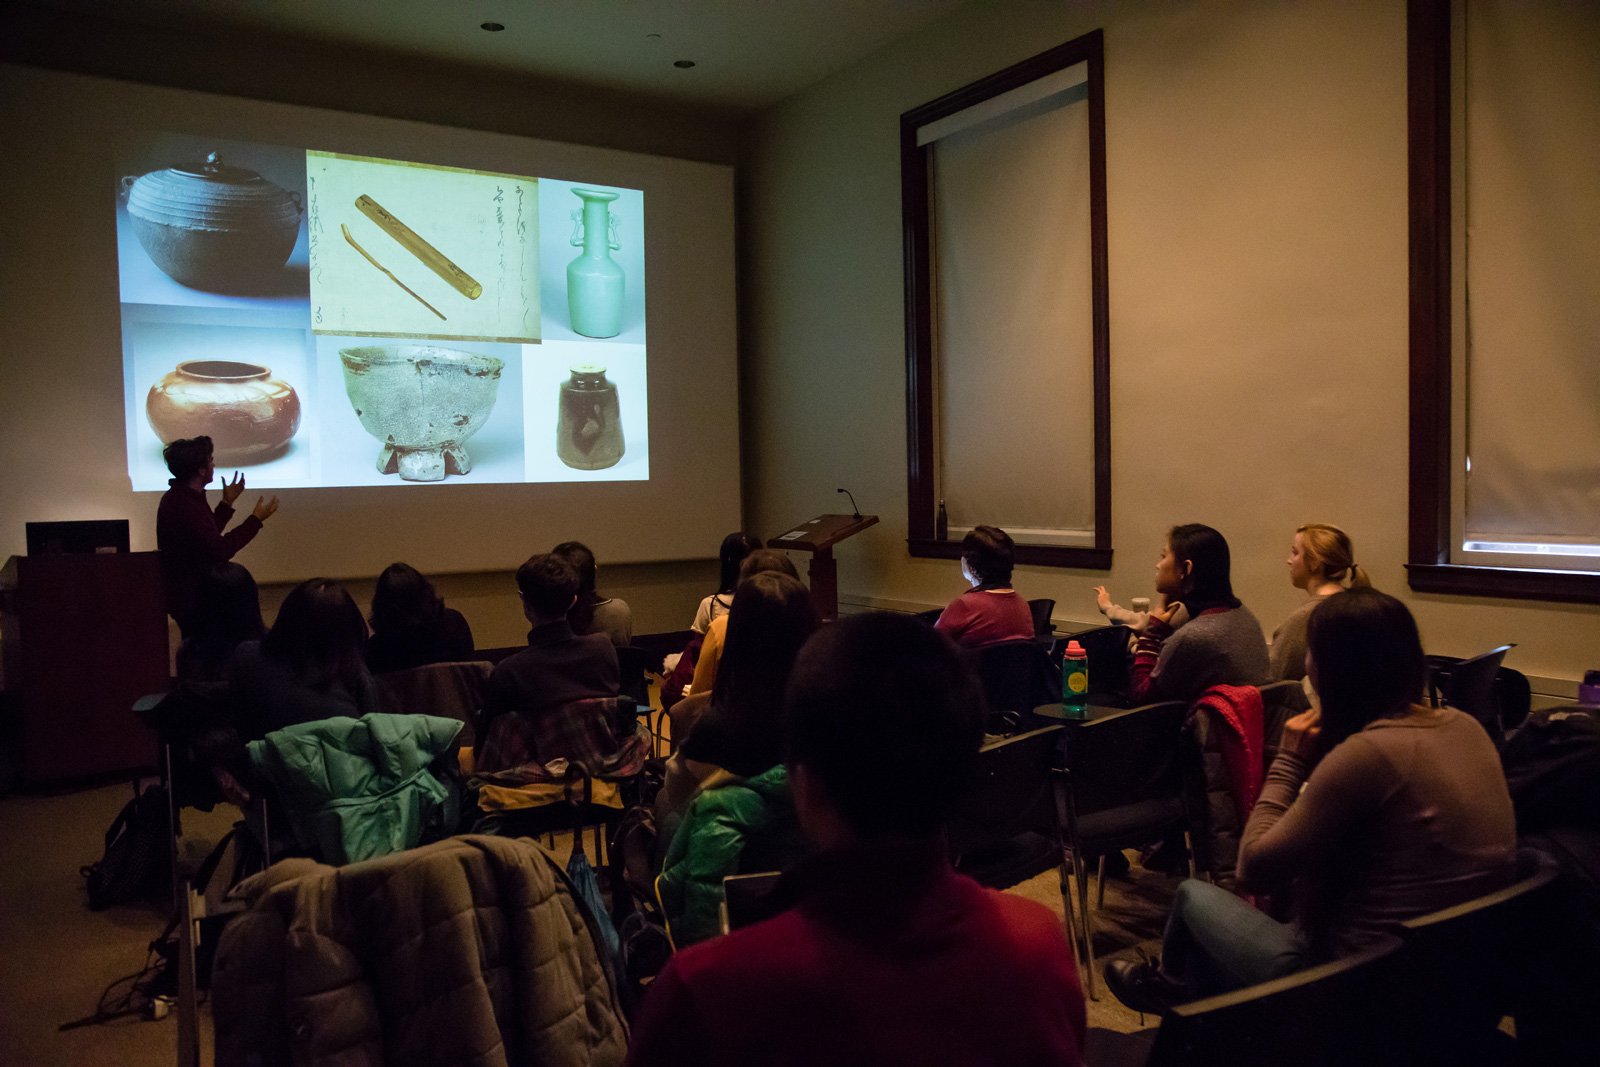 Students in a classroom discuss slideshow showing Japanese ceremonial ceramic bowls